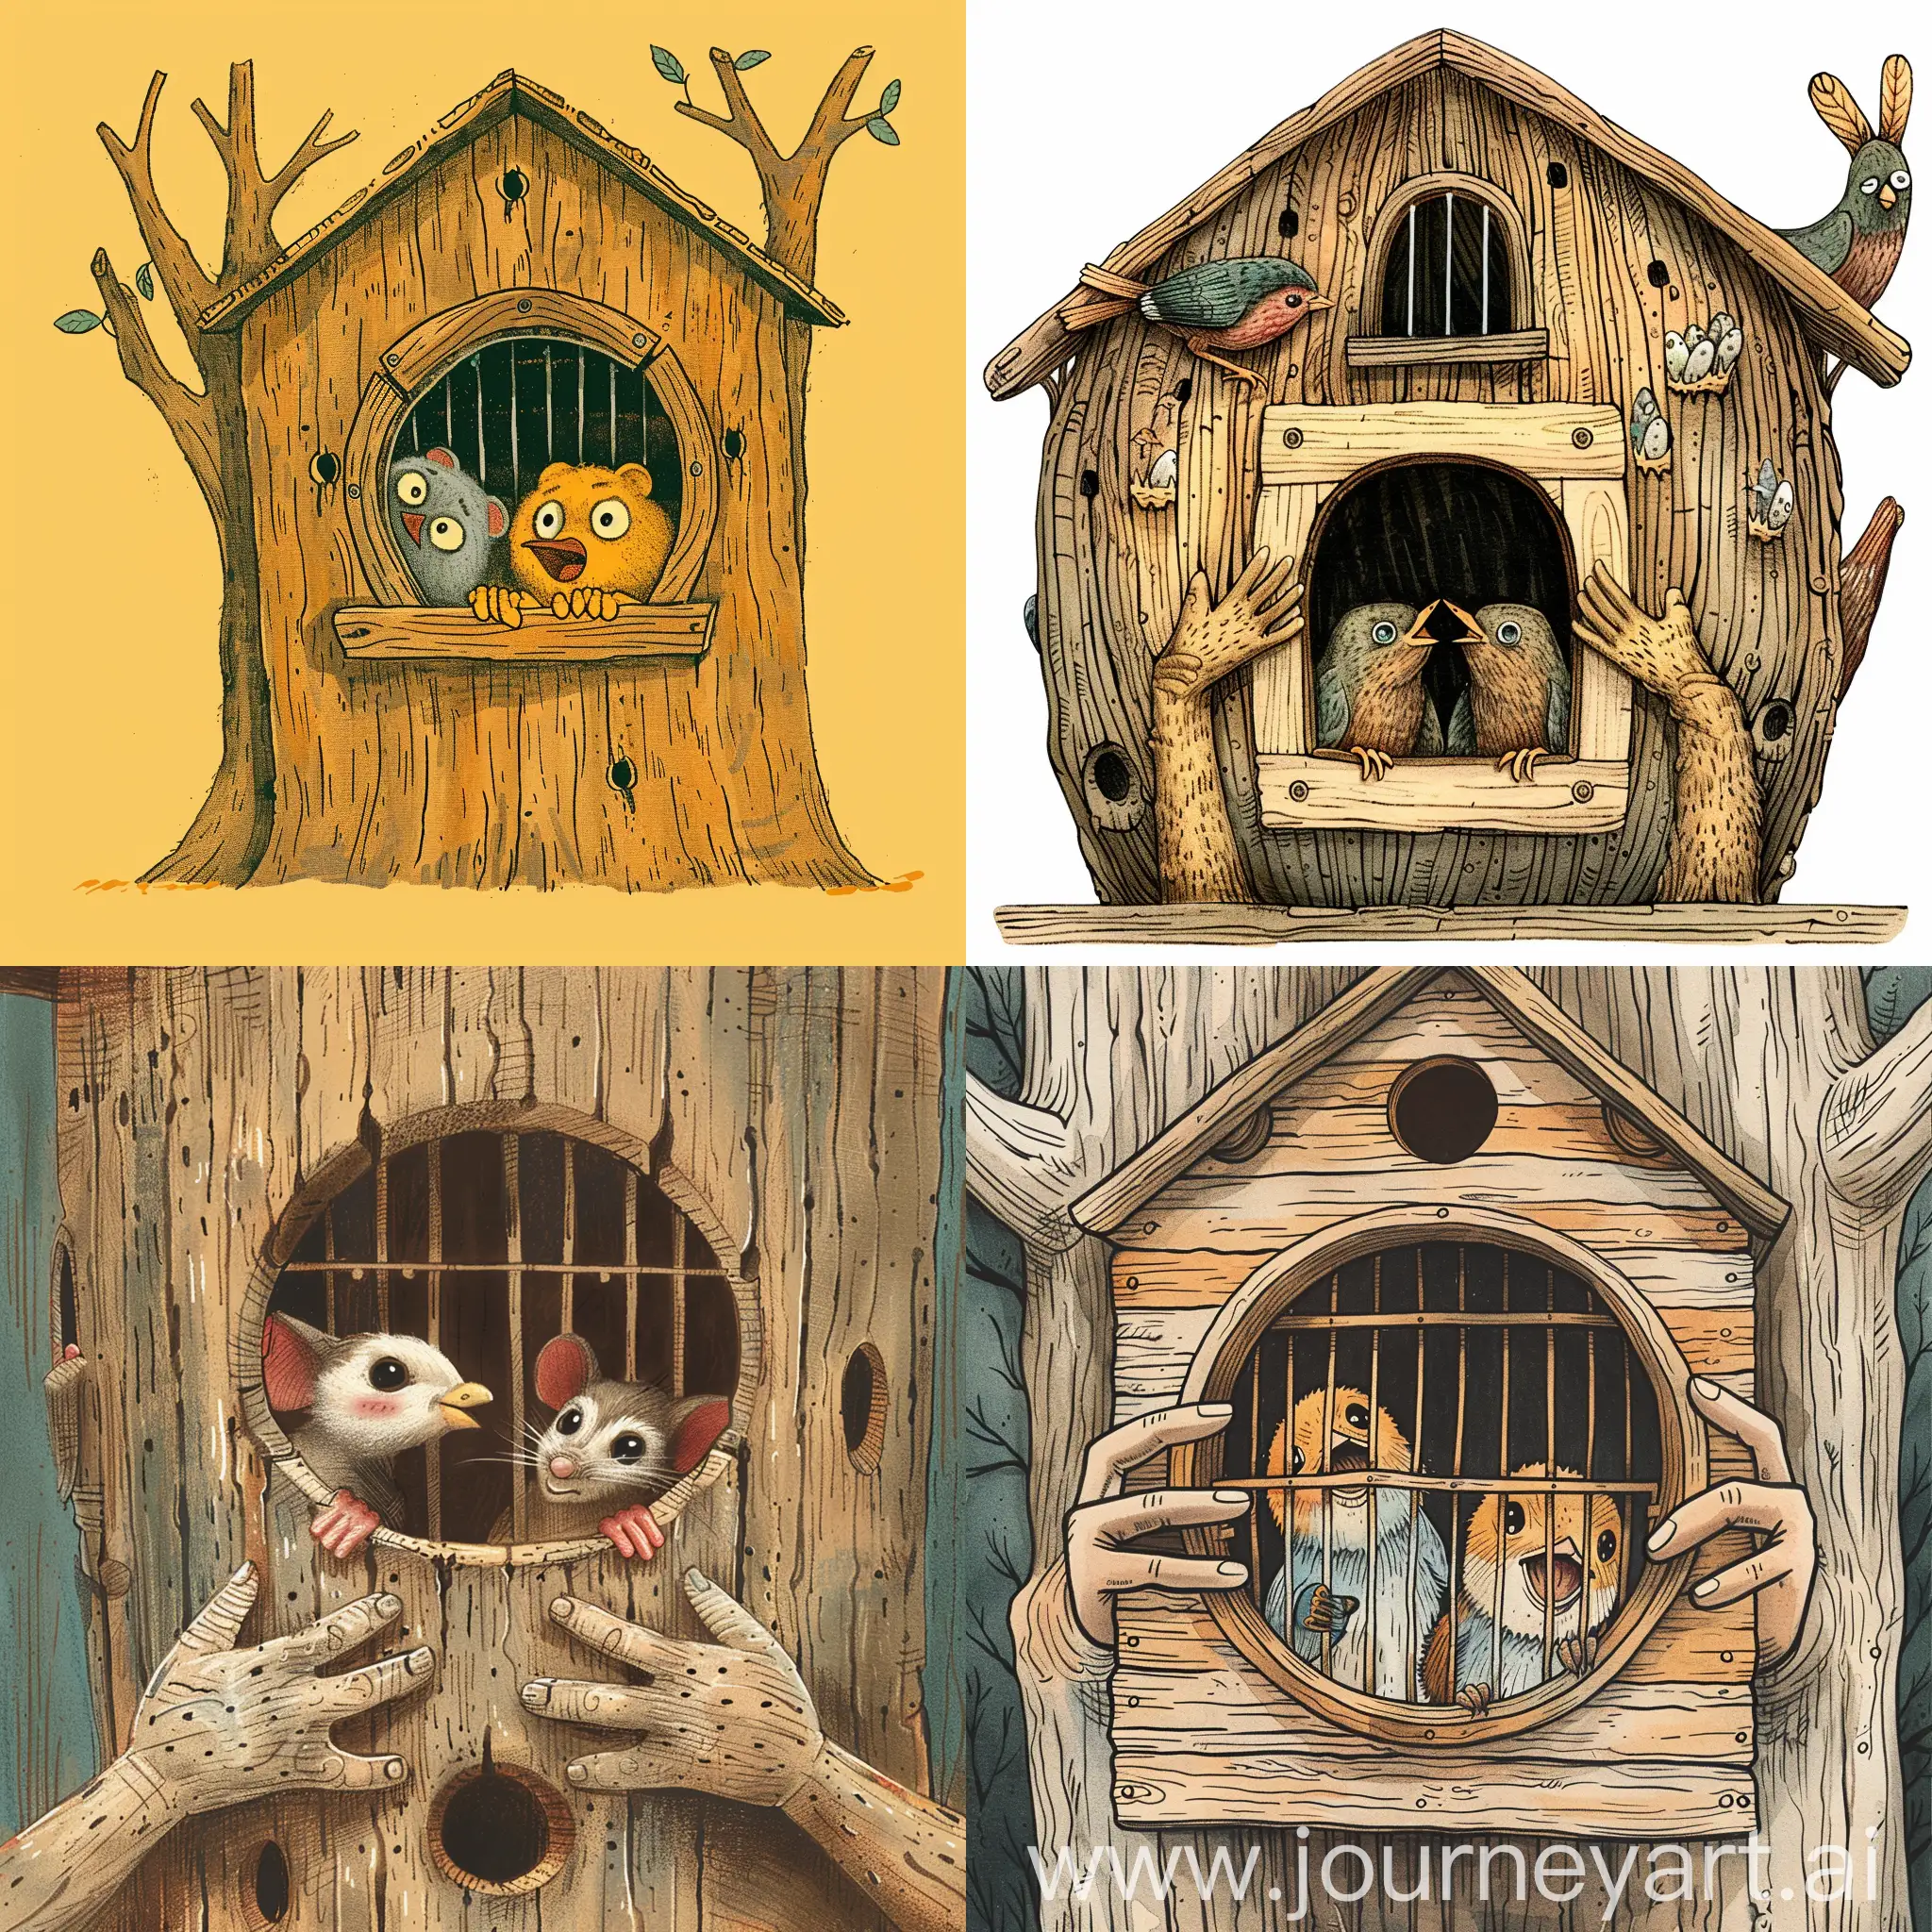 House-shaped birdcage made of wood with hands, birdcage with hands is a tree to a mouse, simple image pattern、Window and hole、Two birds are showing their faces in the hole (focus)、Vintage mouse. Hand drawn, Easter colors, abstract, cheerful, whimsical, funny, children's storybook style